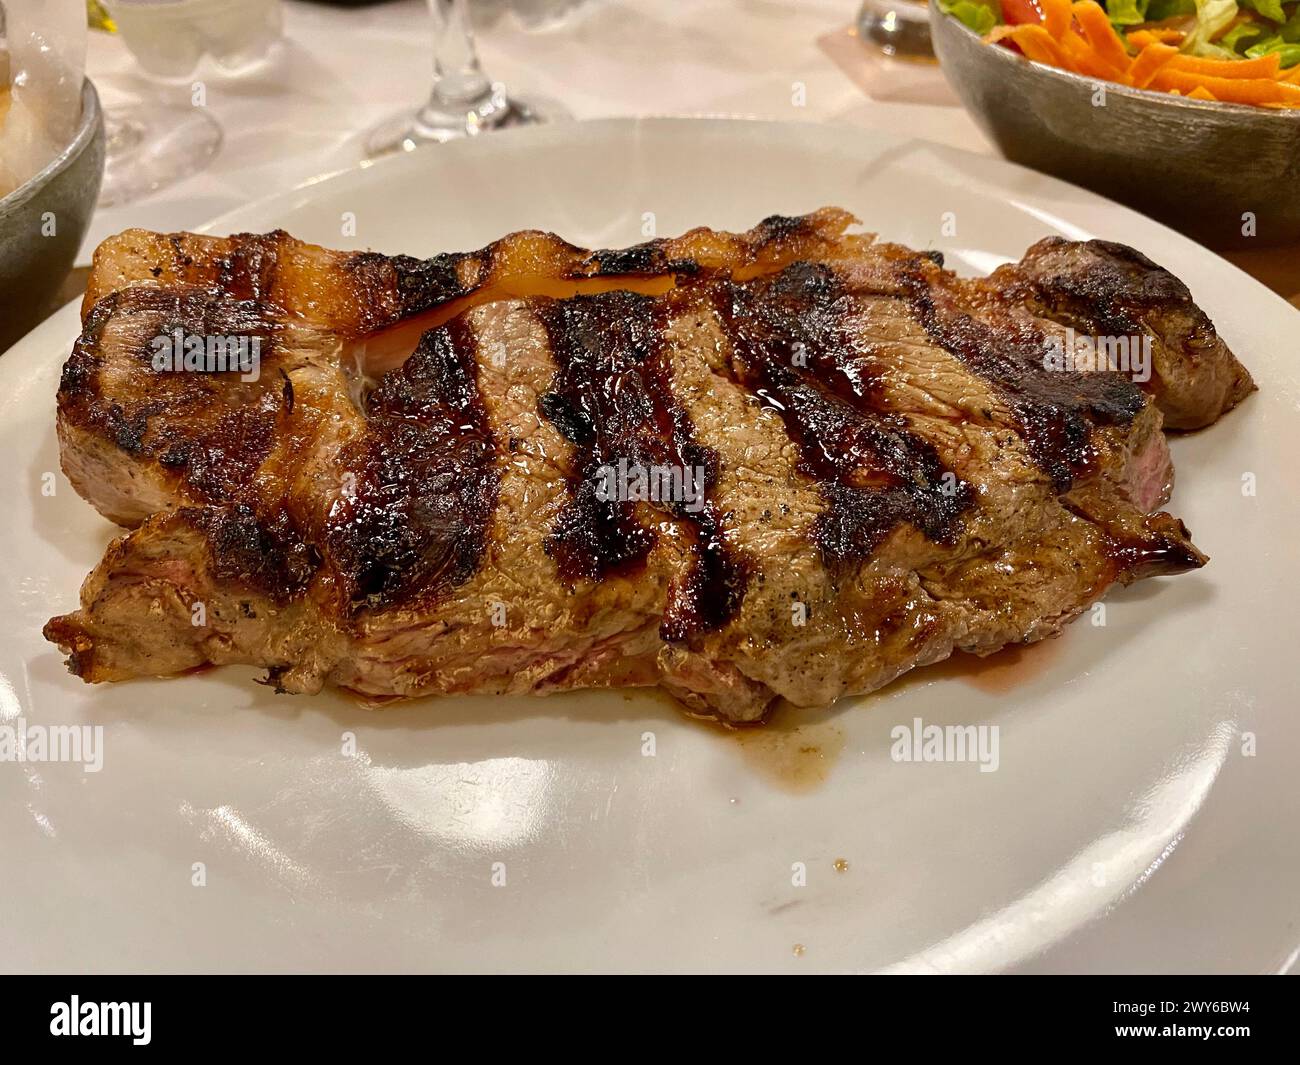 An amazing piece of grilled juicy Argentinian steak on a plate. Stock Photo